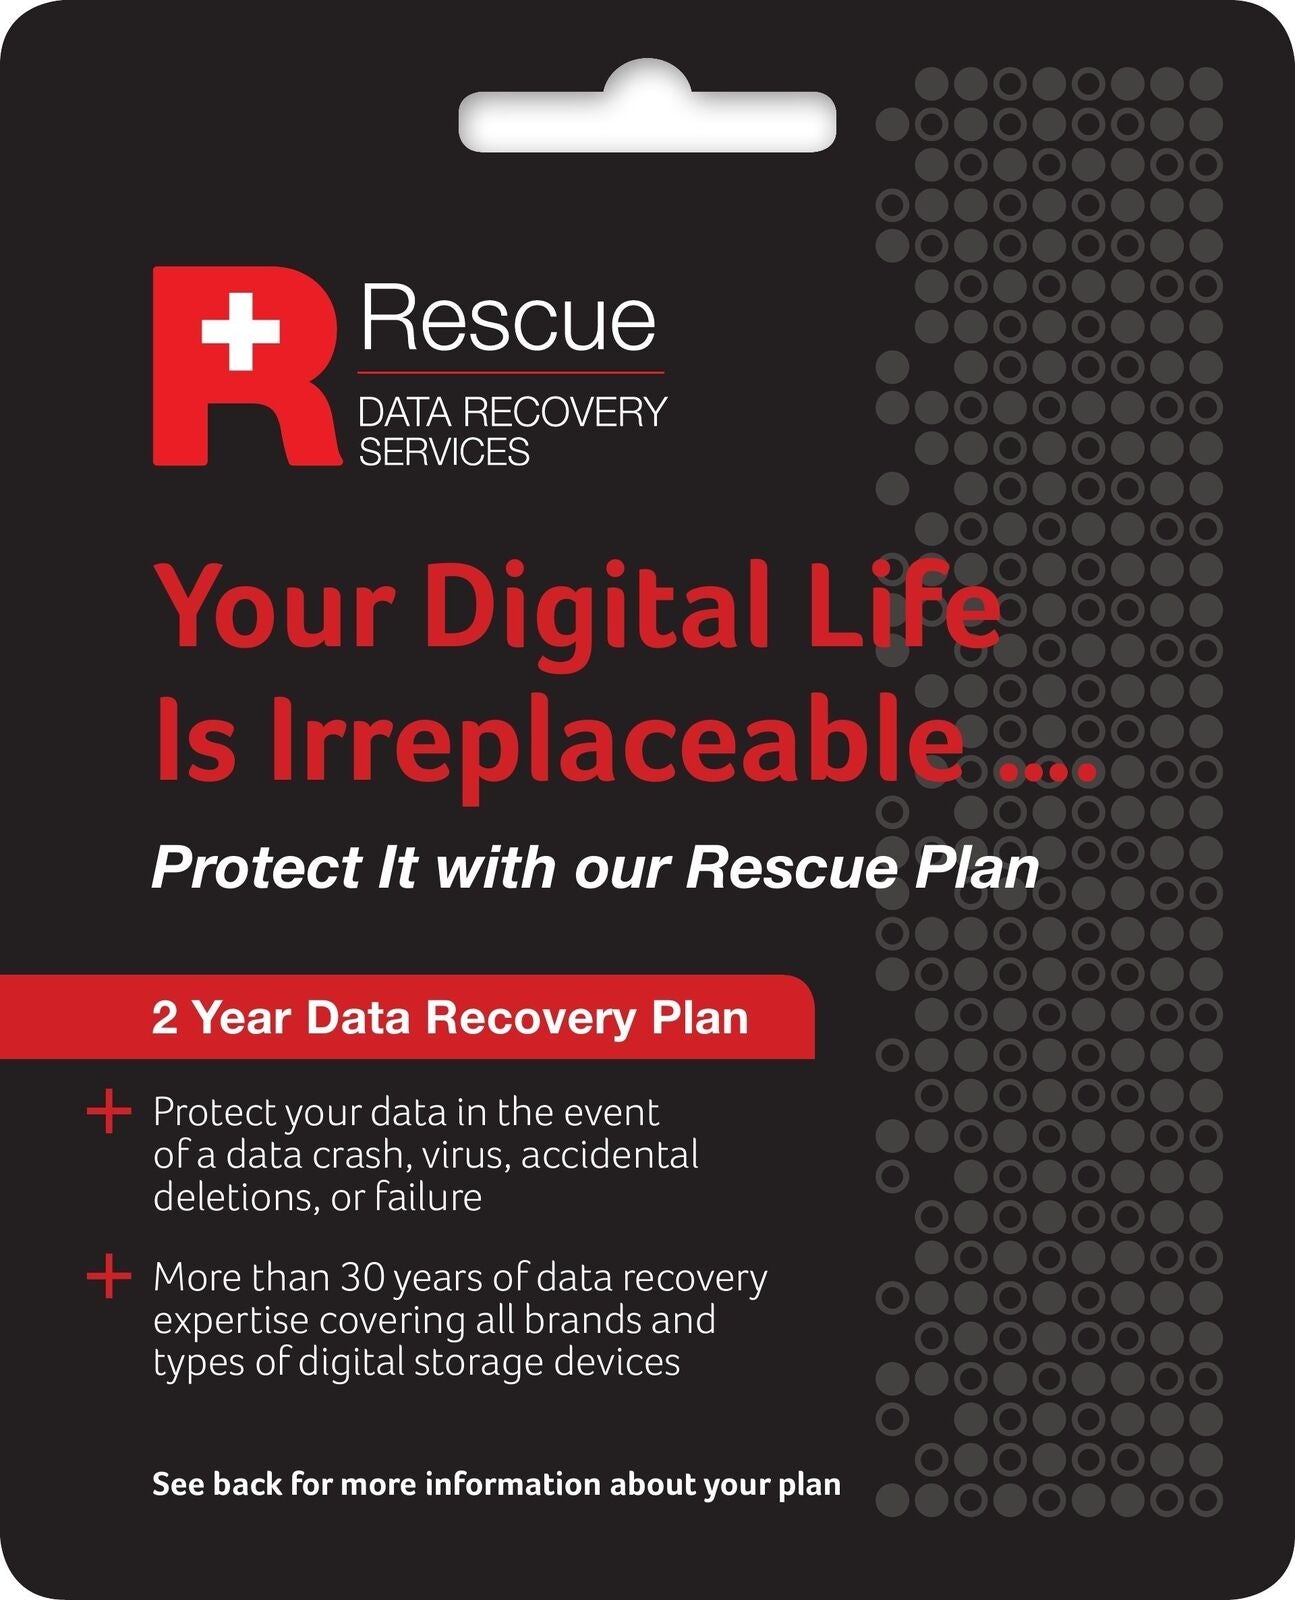 Seagate Stzz758 2 Years Data Recovery Plan For All Hdd, Ssd, Flash,Tablets, Laptops, Smartphones,Dvrs